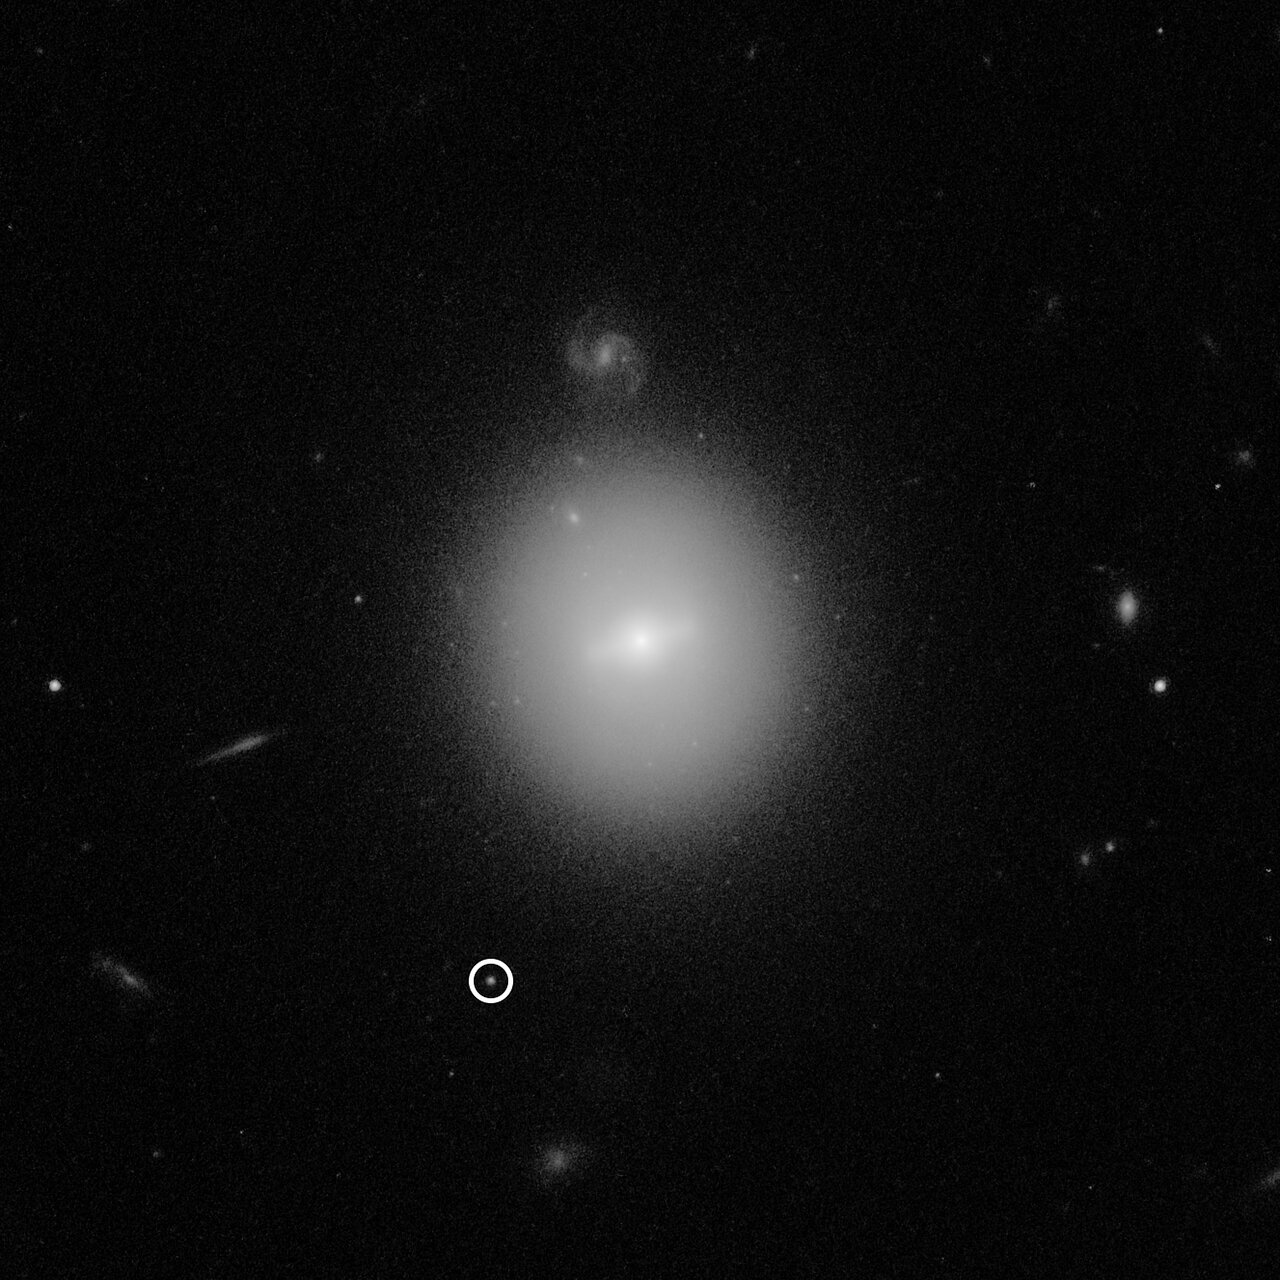 This Hubble Space Telescope image identified the location of an intermediate-mass black hole named J 2150 (3XMM J215022.4 055108), weighing over 50,000 times the mass of our Sun. The black hole is indicated by the white circle. This photo was taken with Hubble's Advanced Camera for Surveys. Image Credit: NASA, ESA, and D. Lin (University of New Hampshire)